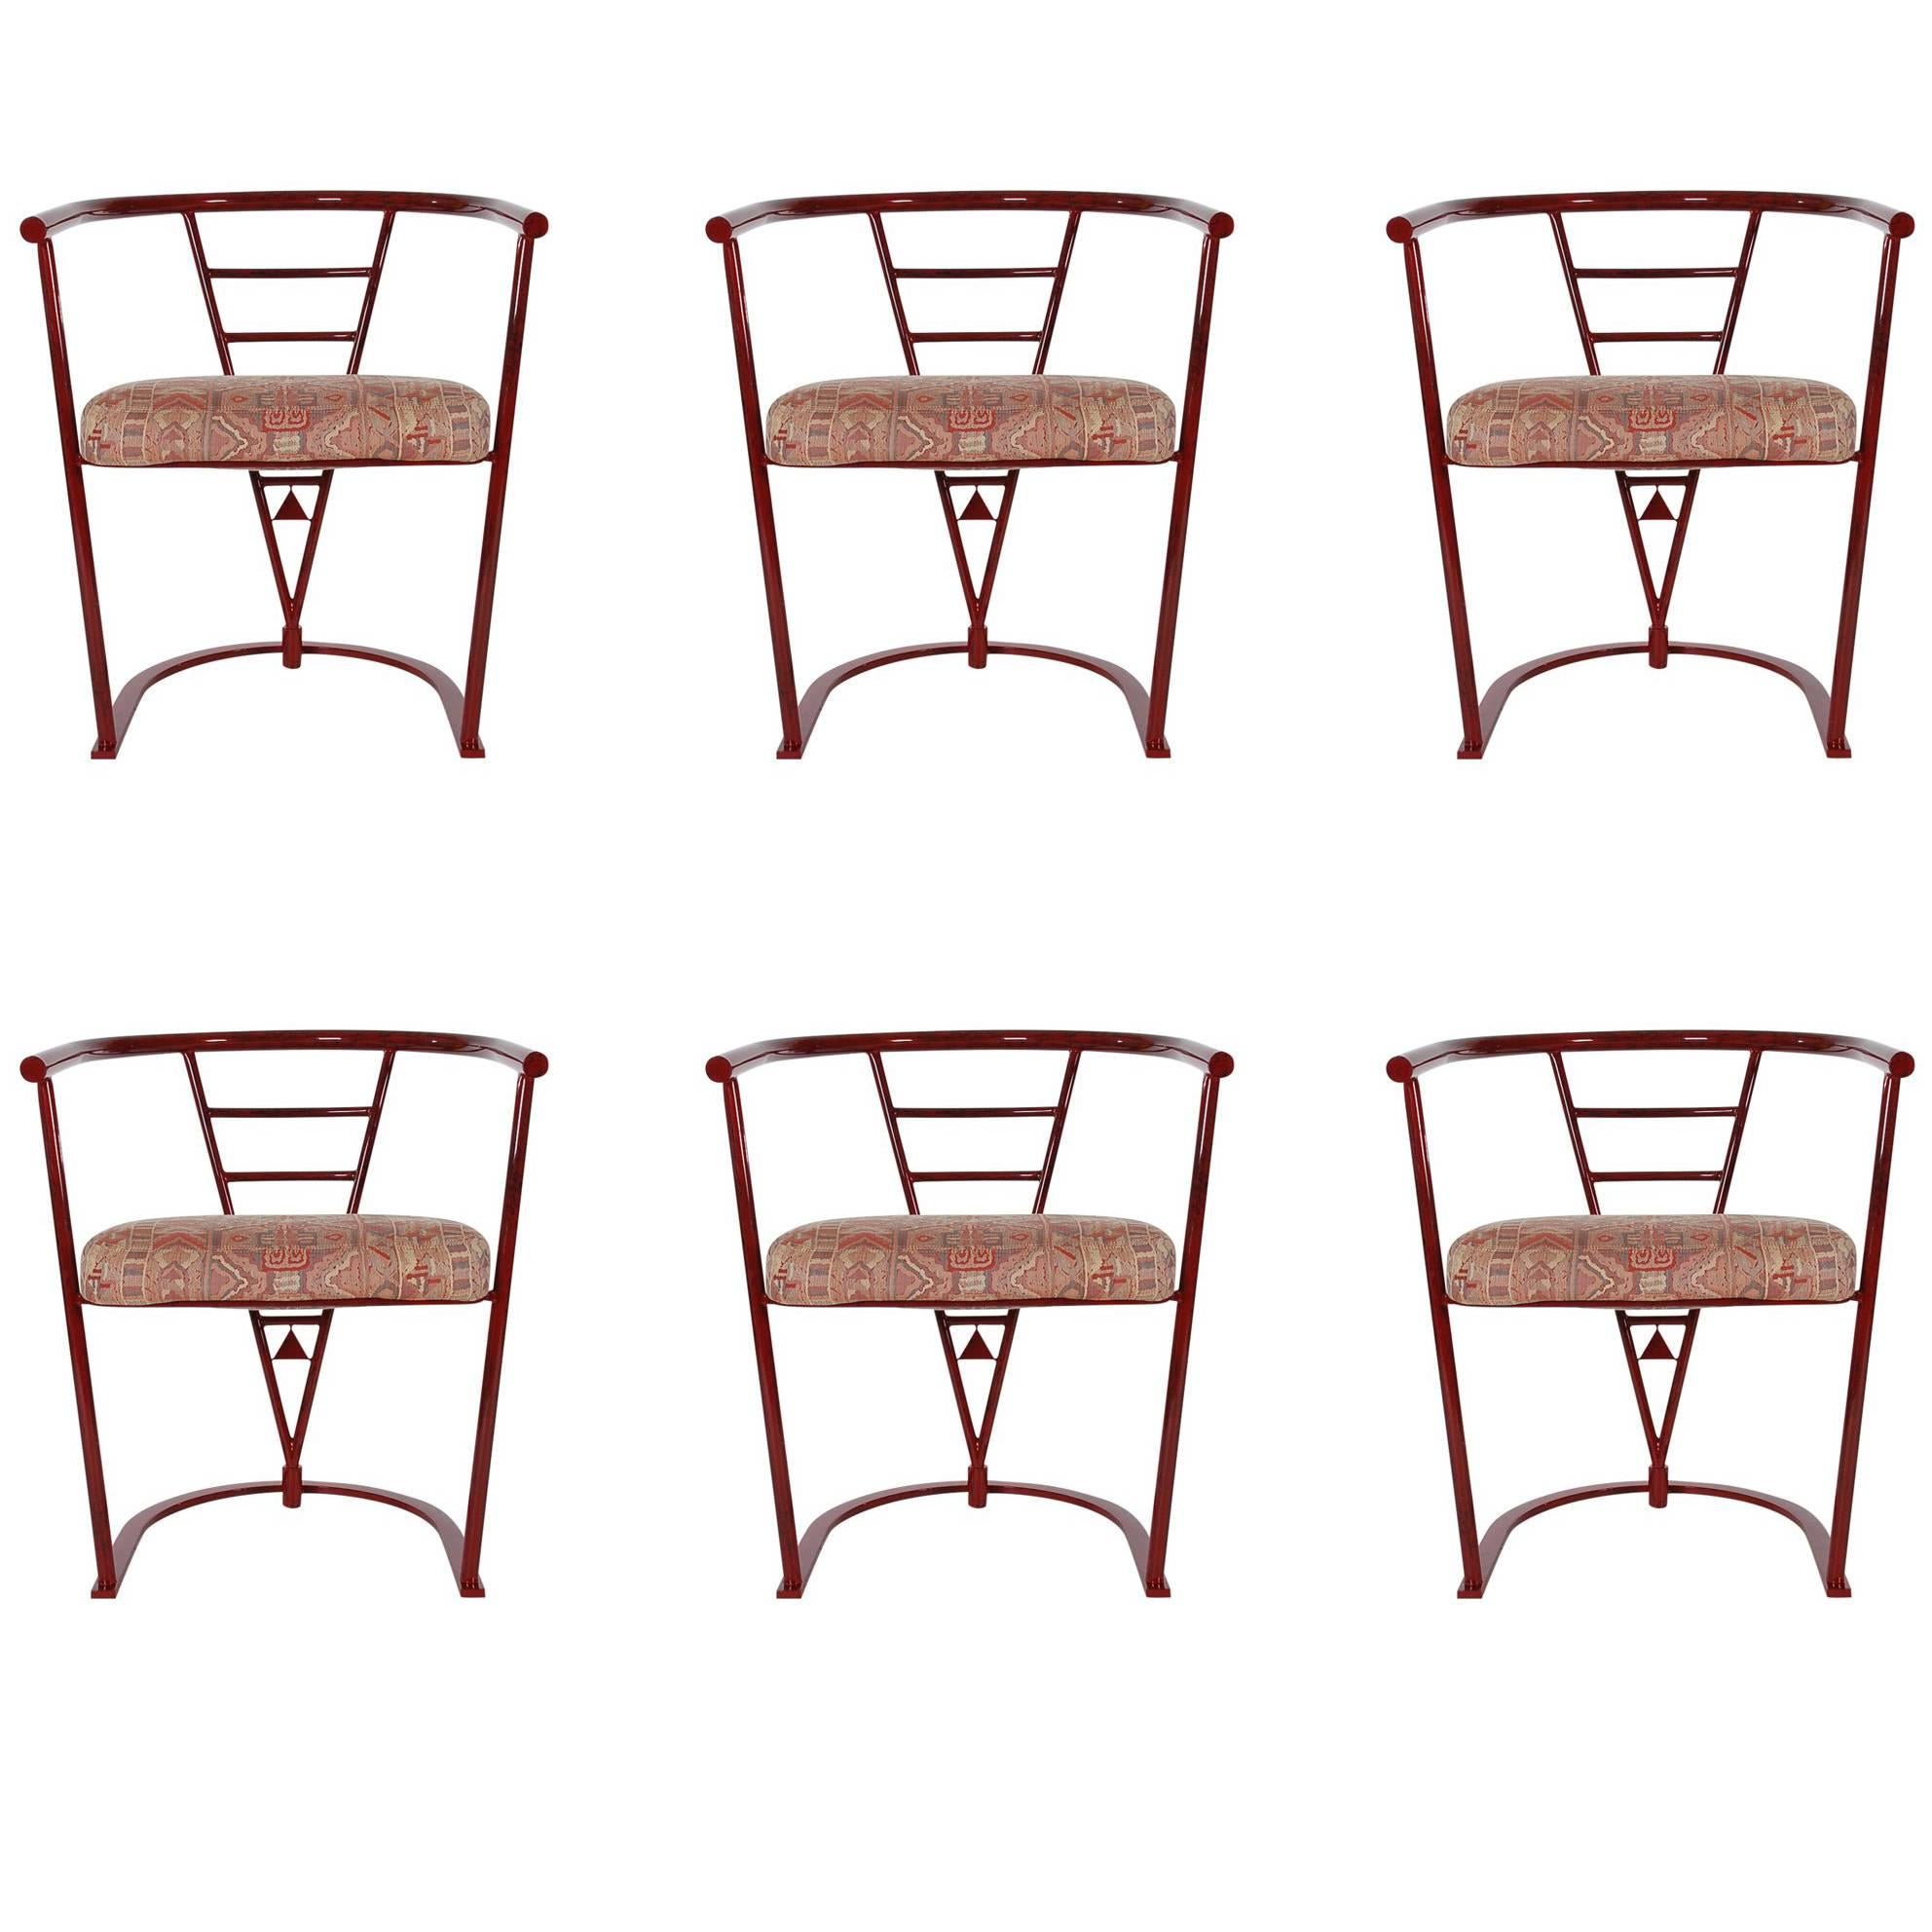 Midcentury Post Modern Italian Style Dining Chairs After Sottsass for Memphis